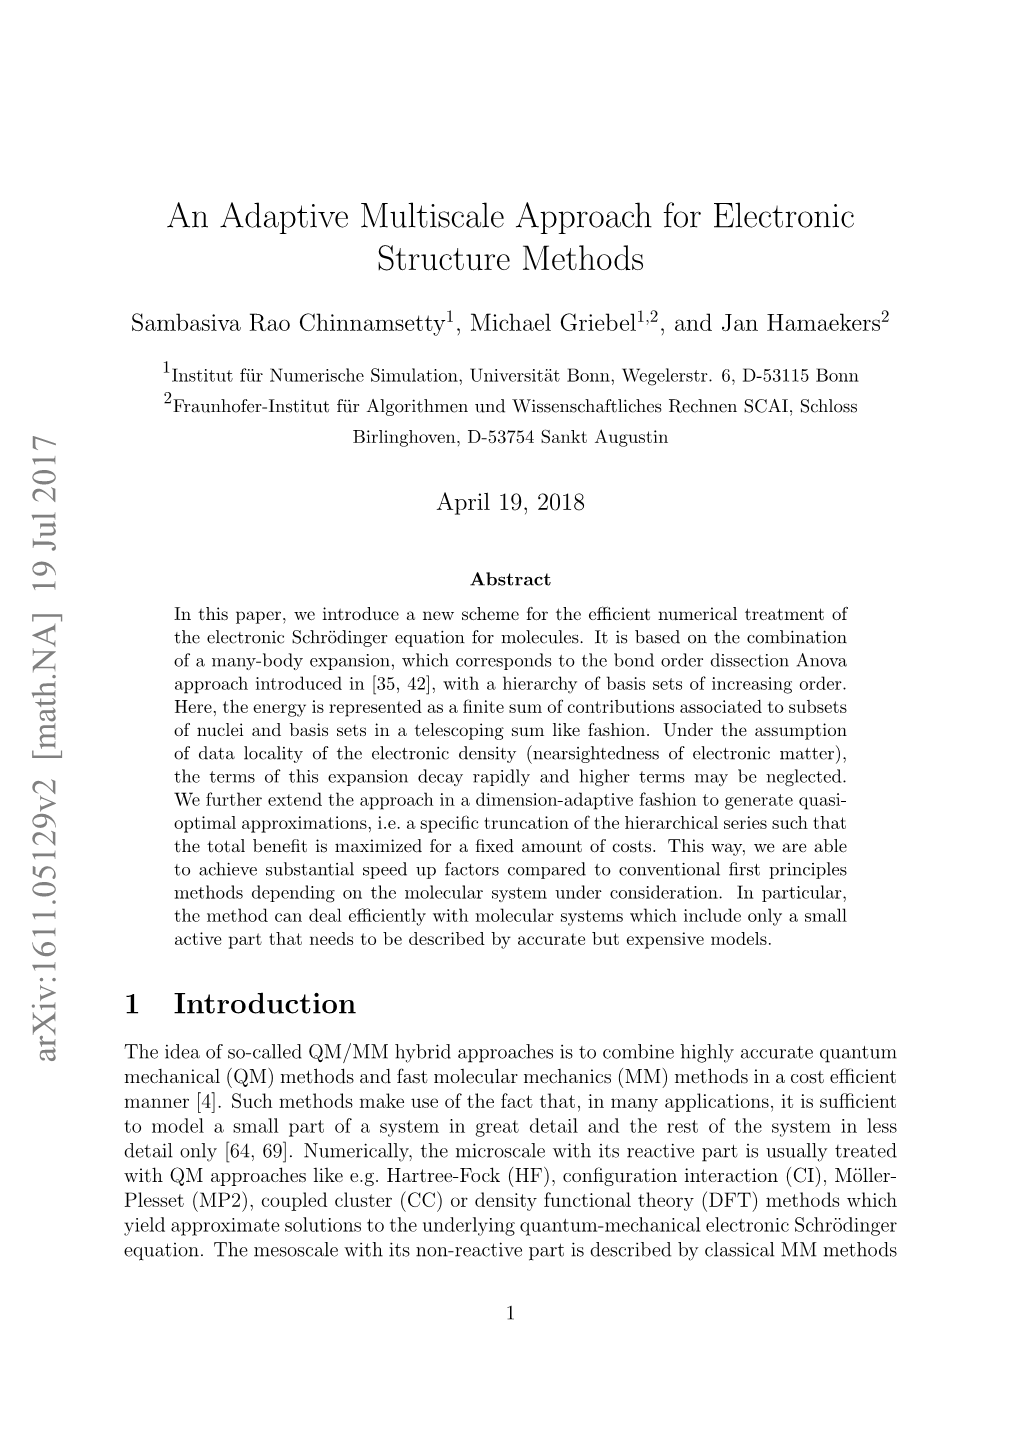 An Adaptive Multiscale Approach for Electronic Structure Methods Arxiv